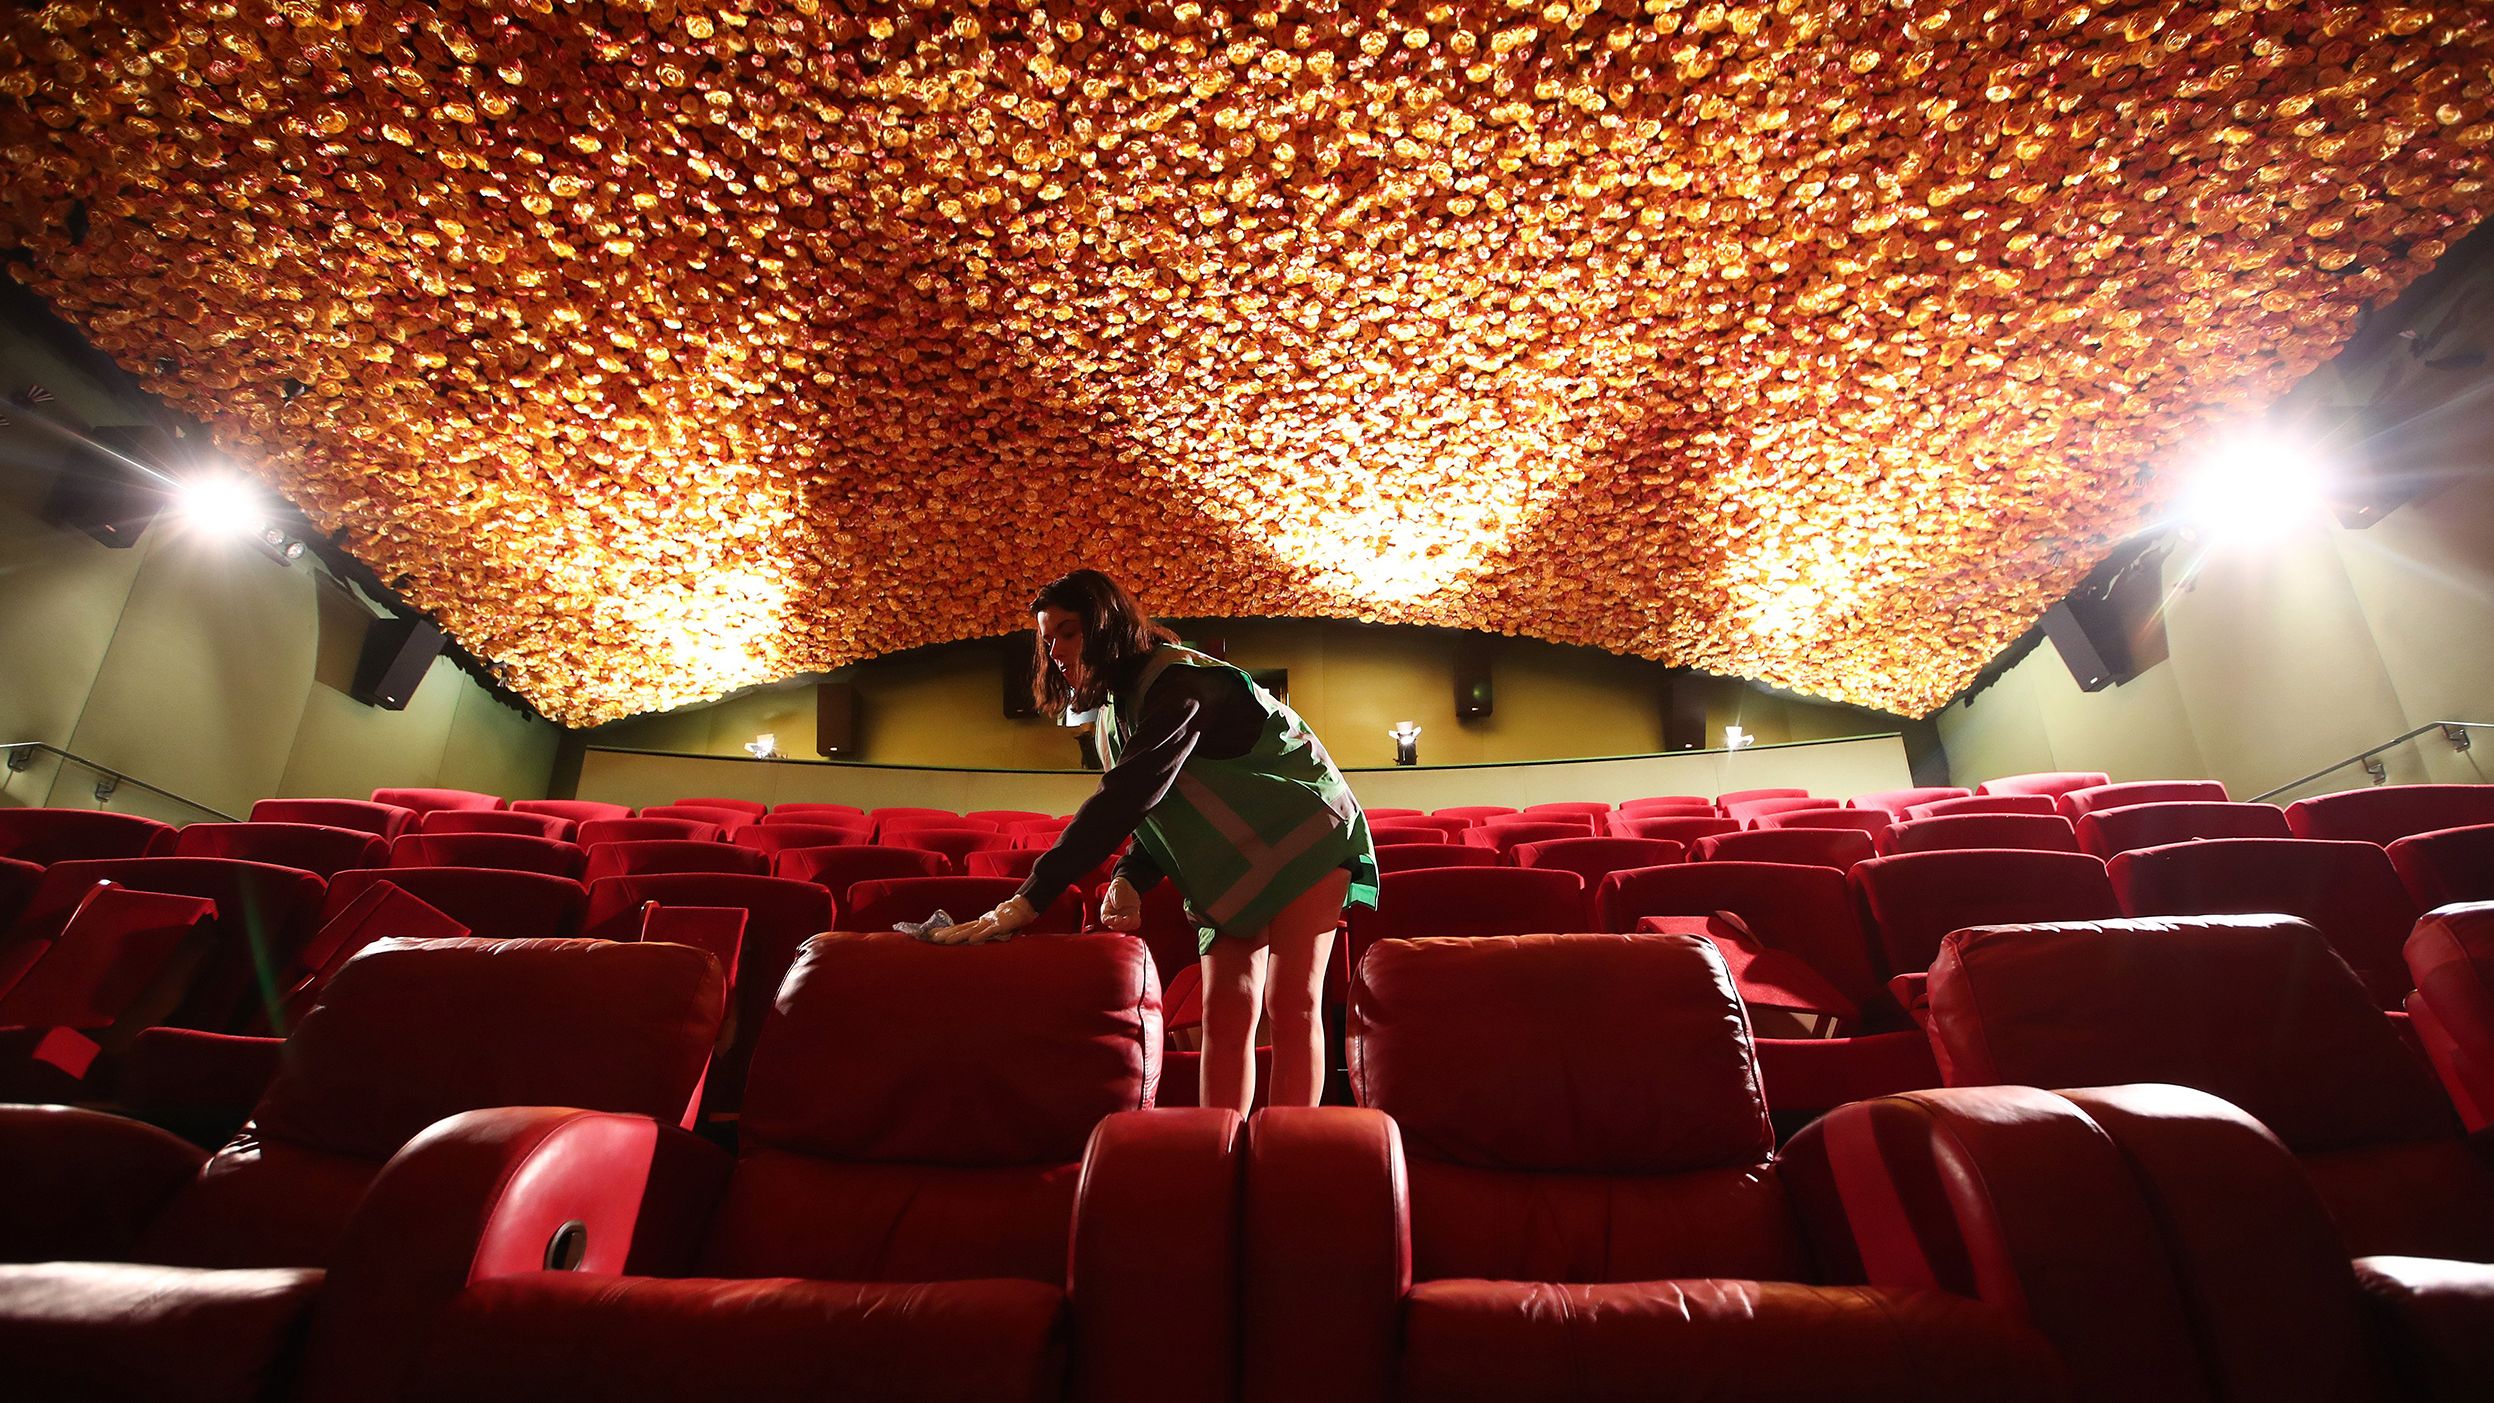 Jasmine Donaldson cleans a movie theater in Auckland, New Zealand, on May 22. Matakana Cinemas reopened May 28 with a reduced capacity to allow for social distancing between seats and in the foyer.